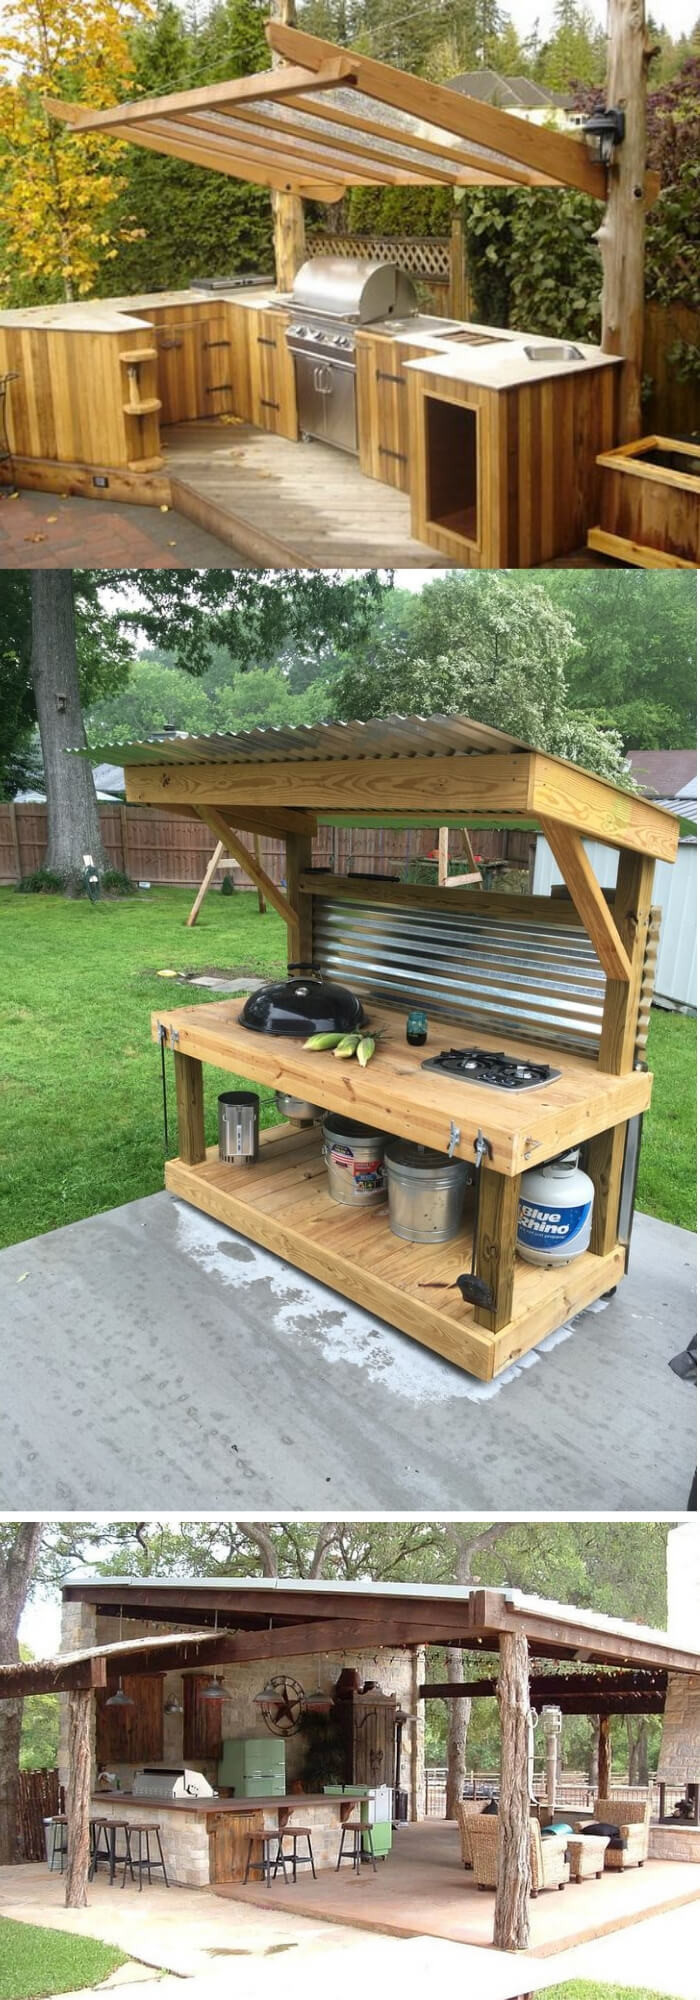 DIY Outdoor Kitchens On A Budget
 31 Stunning Outdoor Kitchen Ideas & Designs With